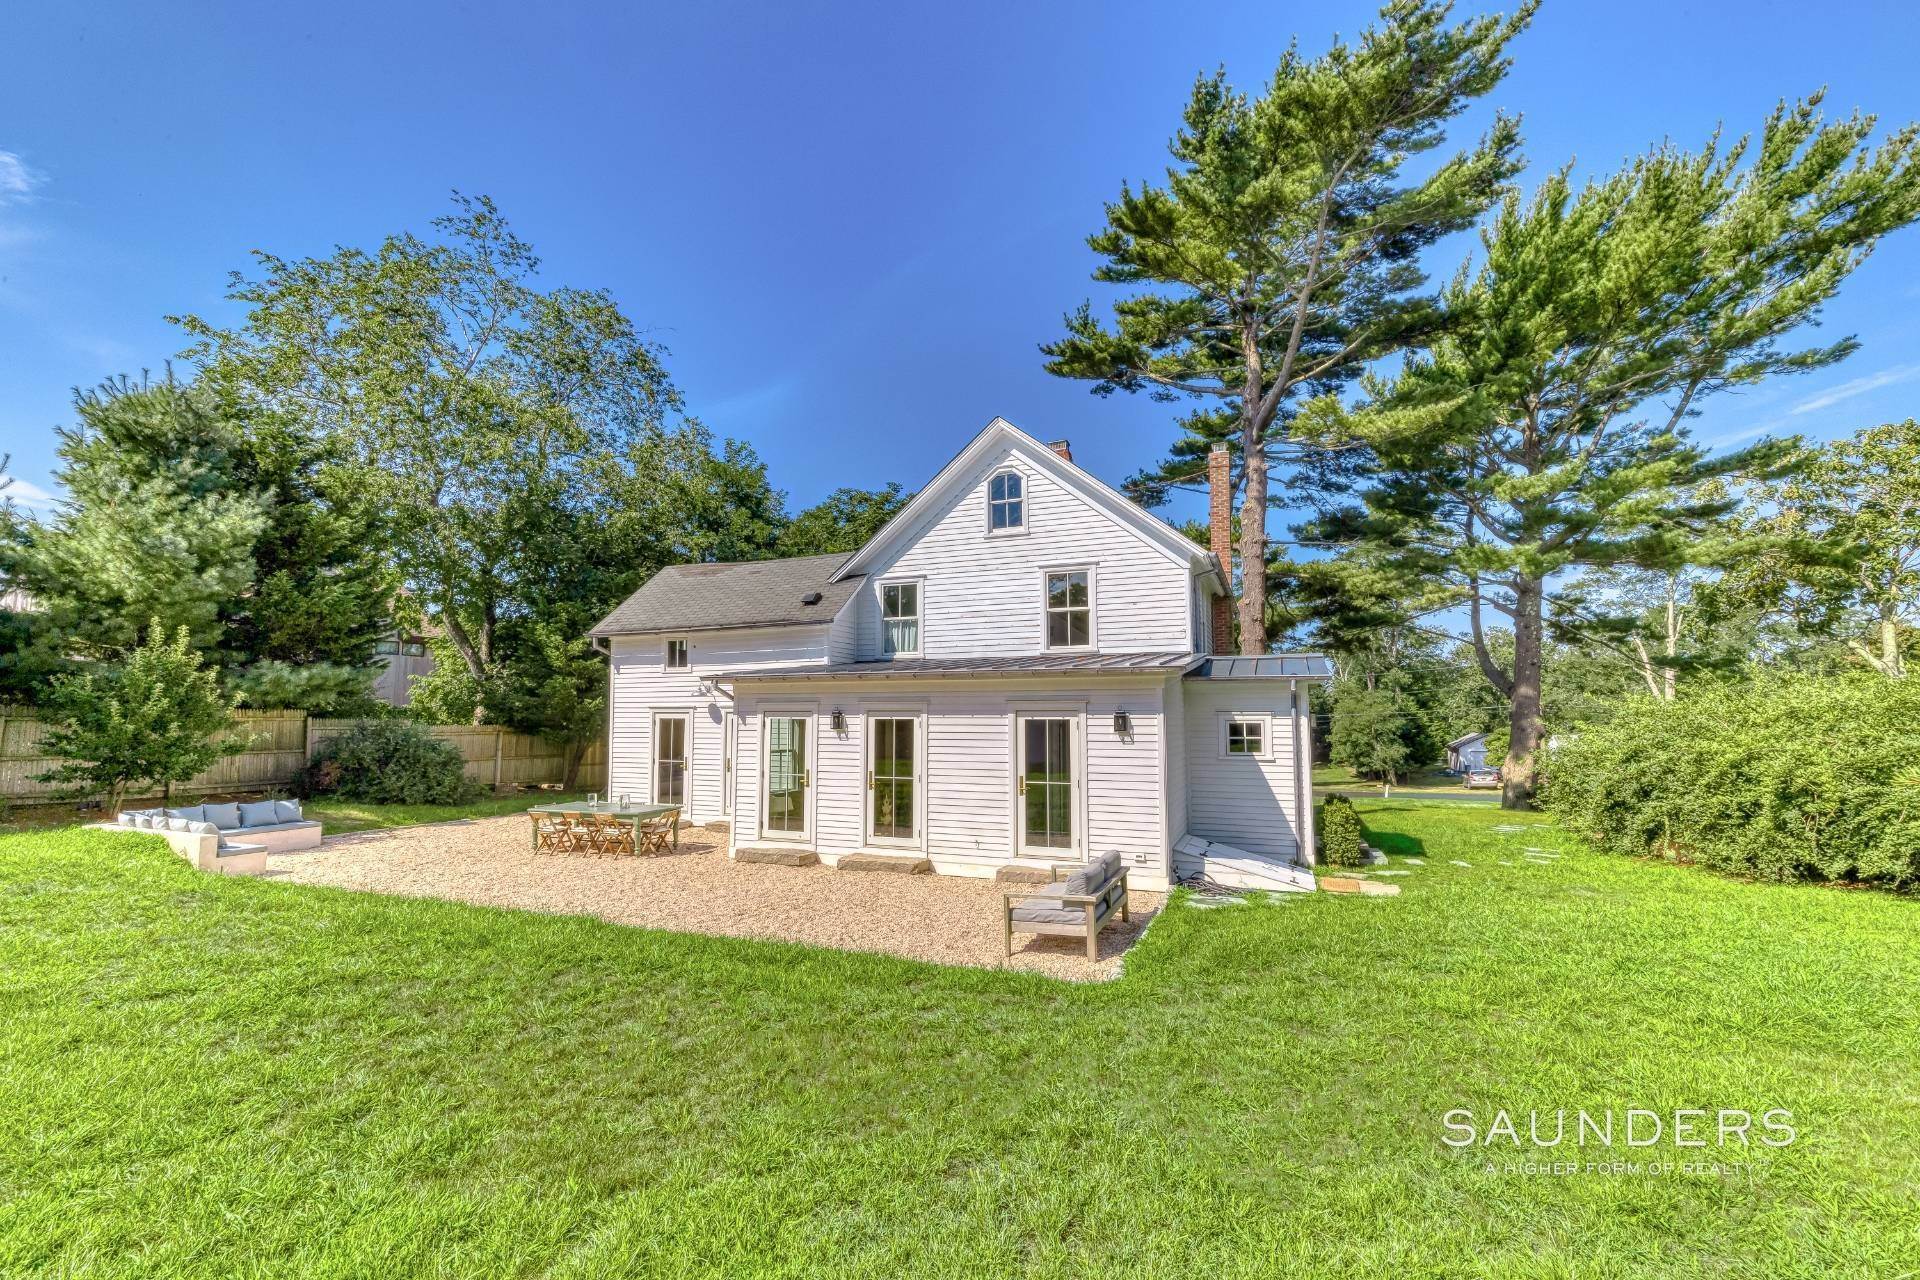 Single Family Homes for Sale at Shelter Island Restored 1900 Farmhouse With Barn 9 Sunshine Road, Shelter Island, NY 11964